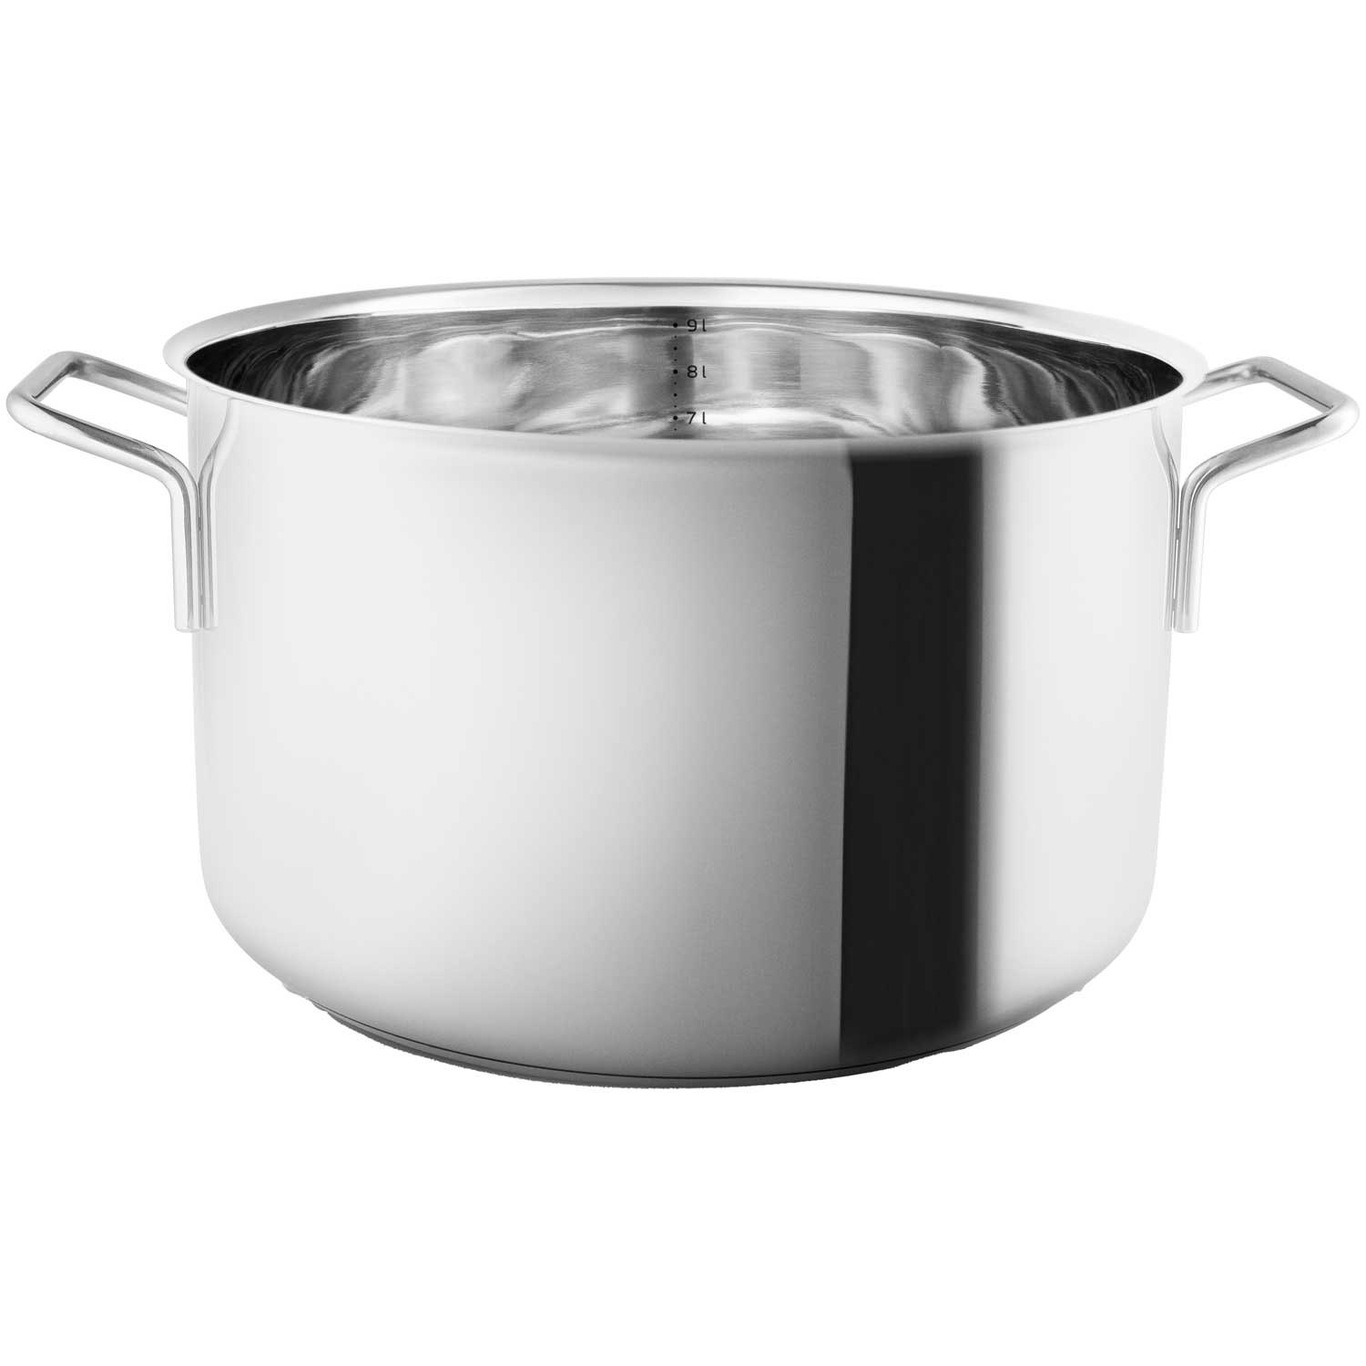 Pot Stainless Steel, 9 L